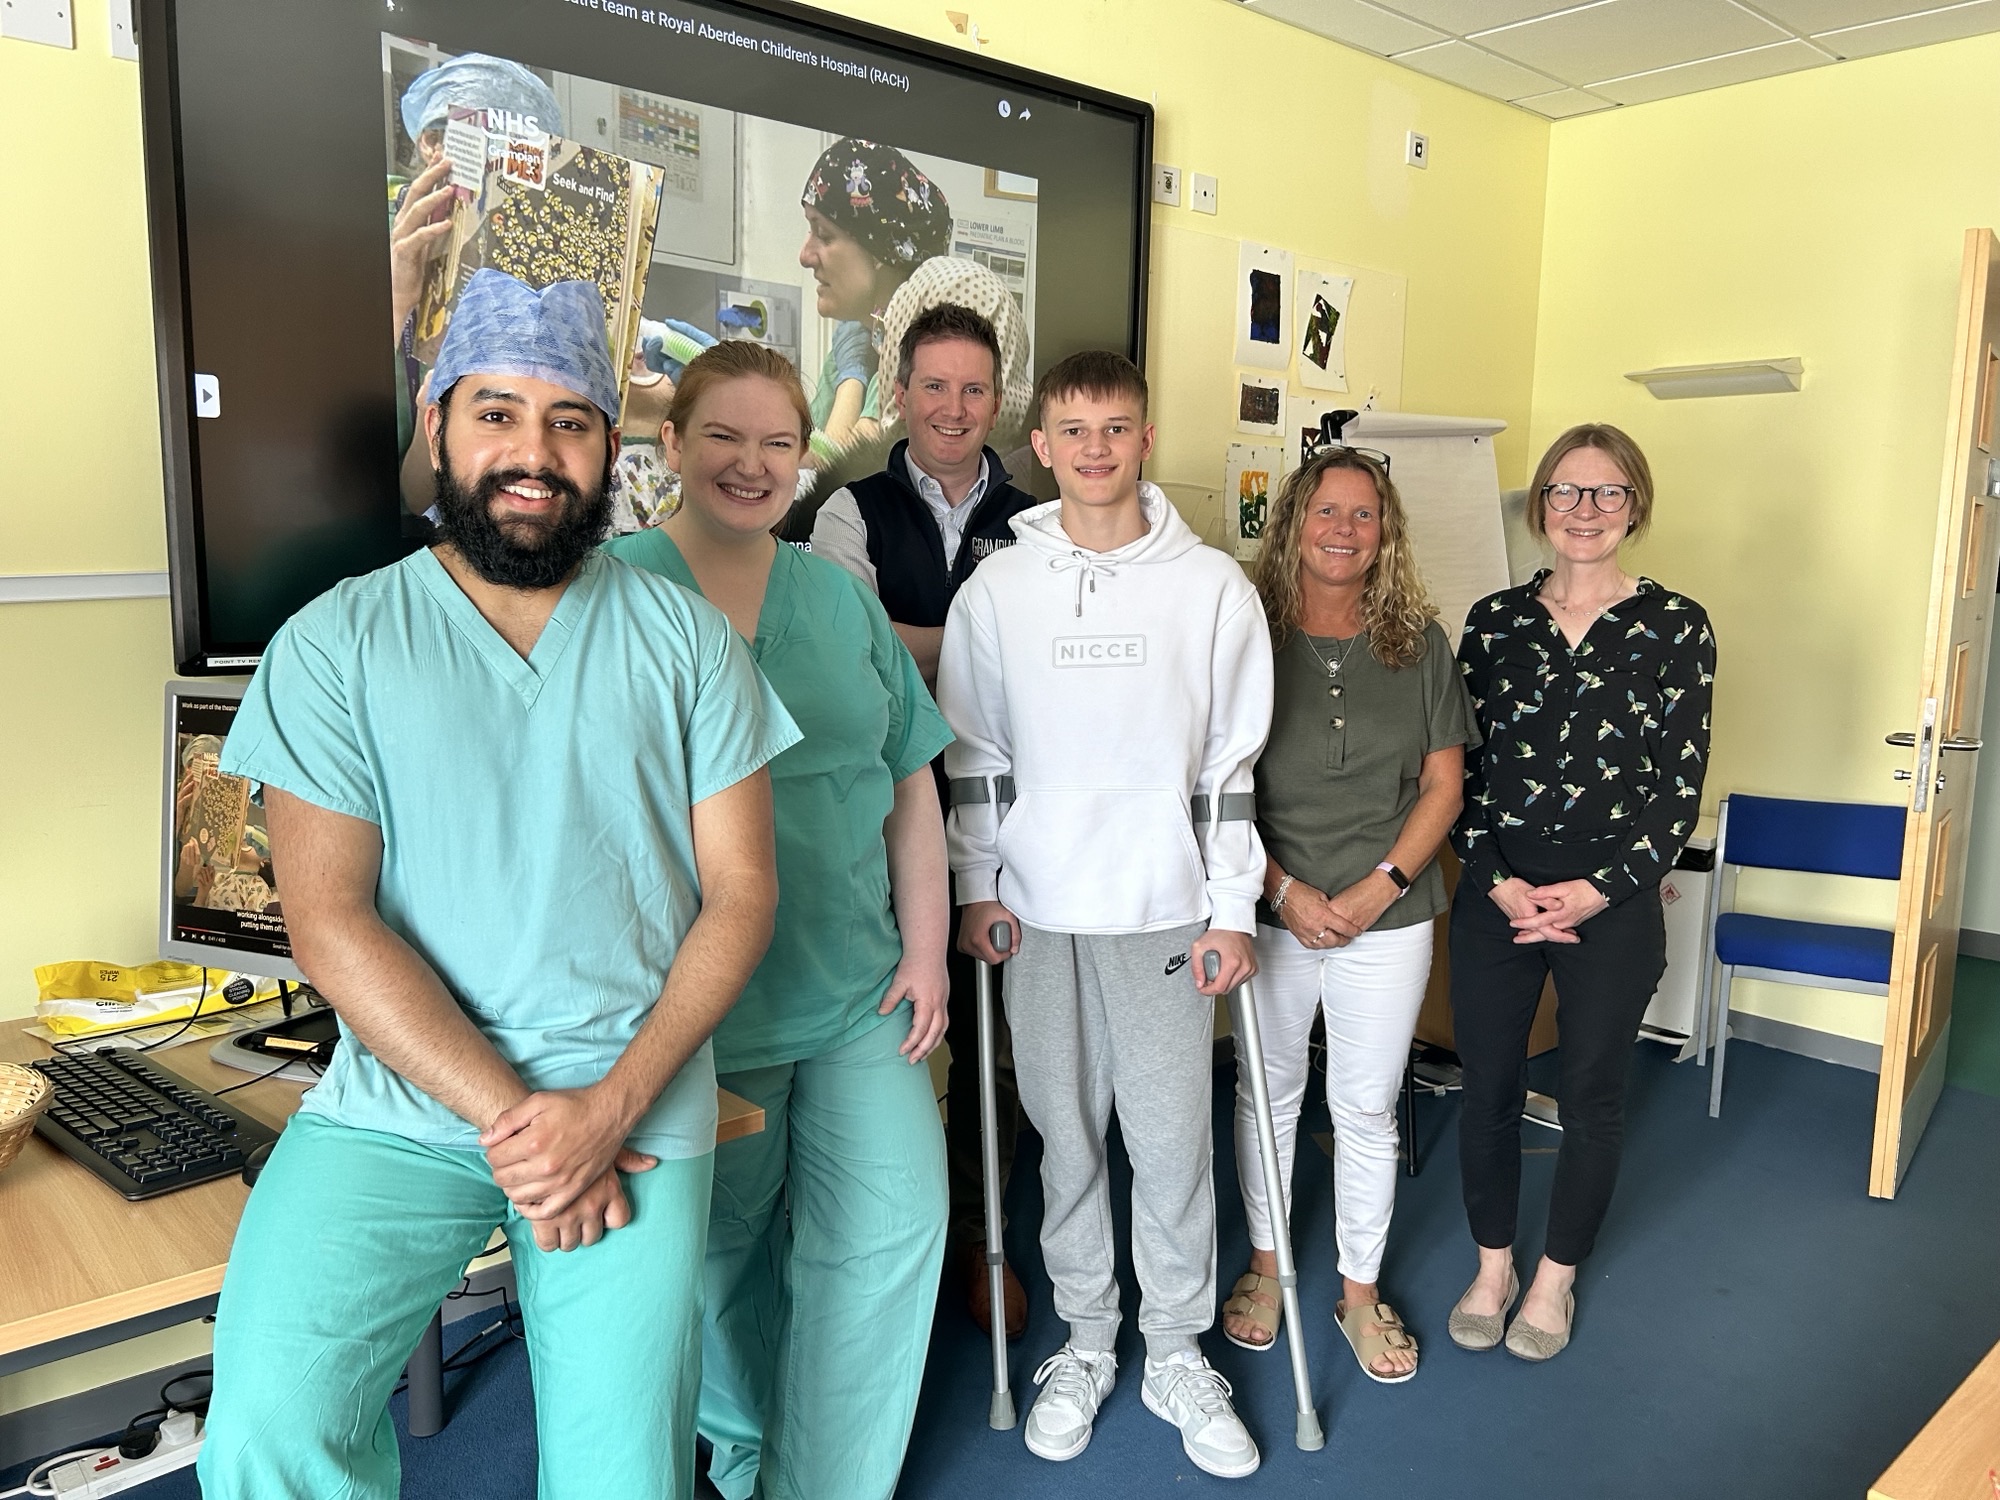 Prab Singh, Louise Forsyth, Mike Reidy, Finlay Thomson, Tracey Thomson and Kay Davies at a special staff screening of the new films at Royal Aberdeen Children’s Hospital.